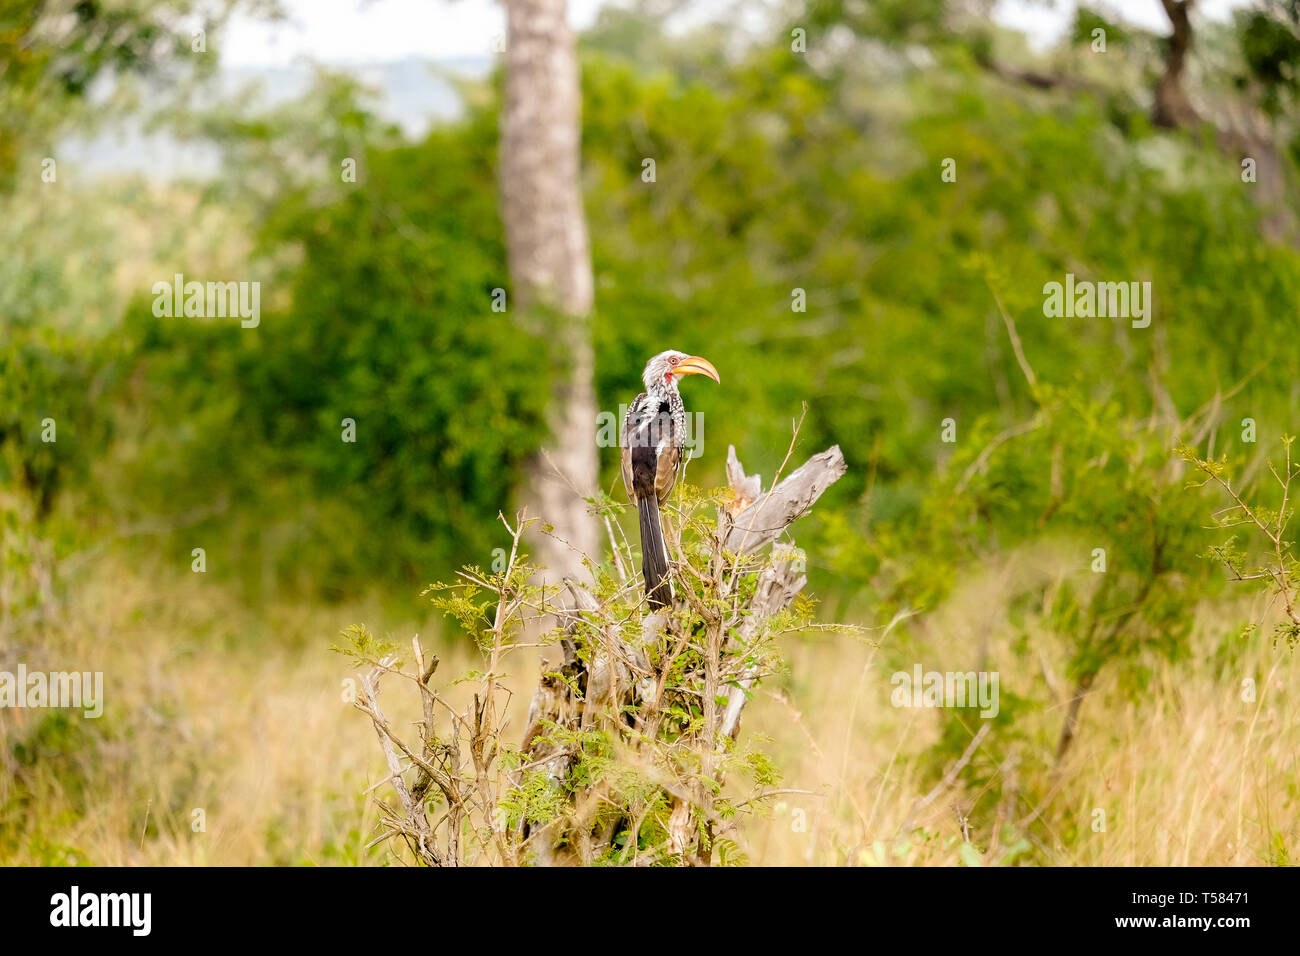 African Red-billed hornbill on a tree branch Stock Photo